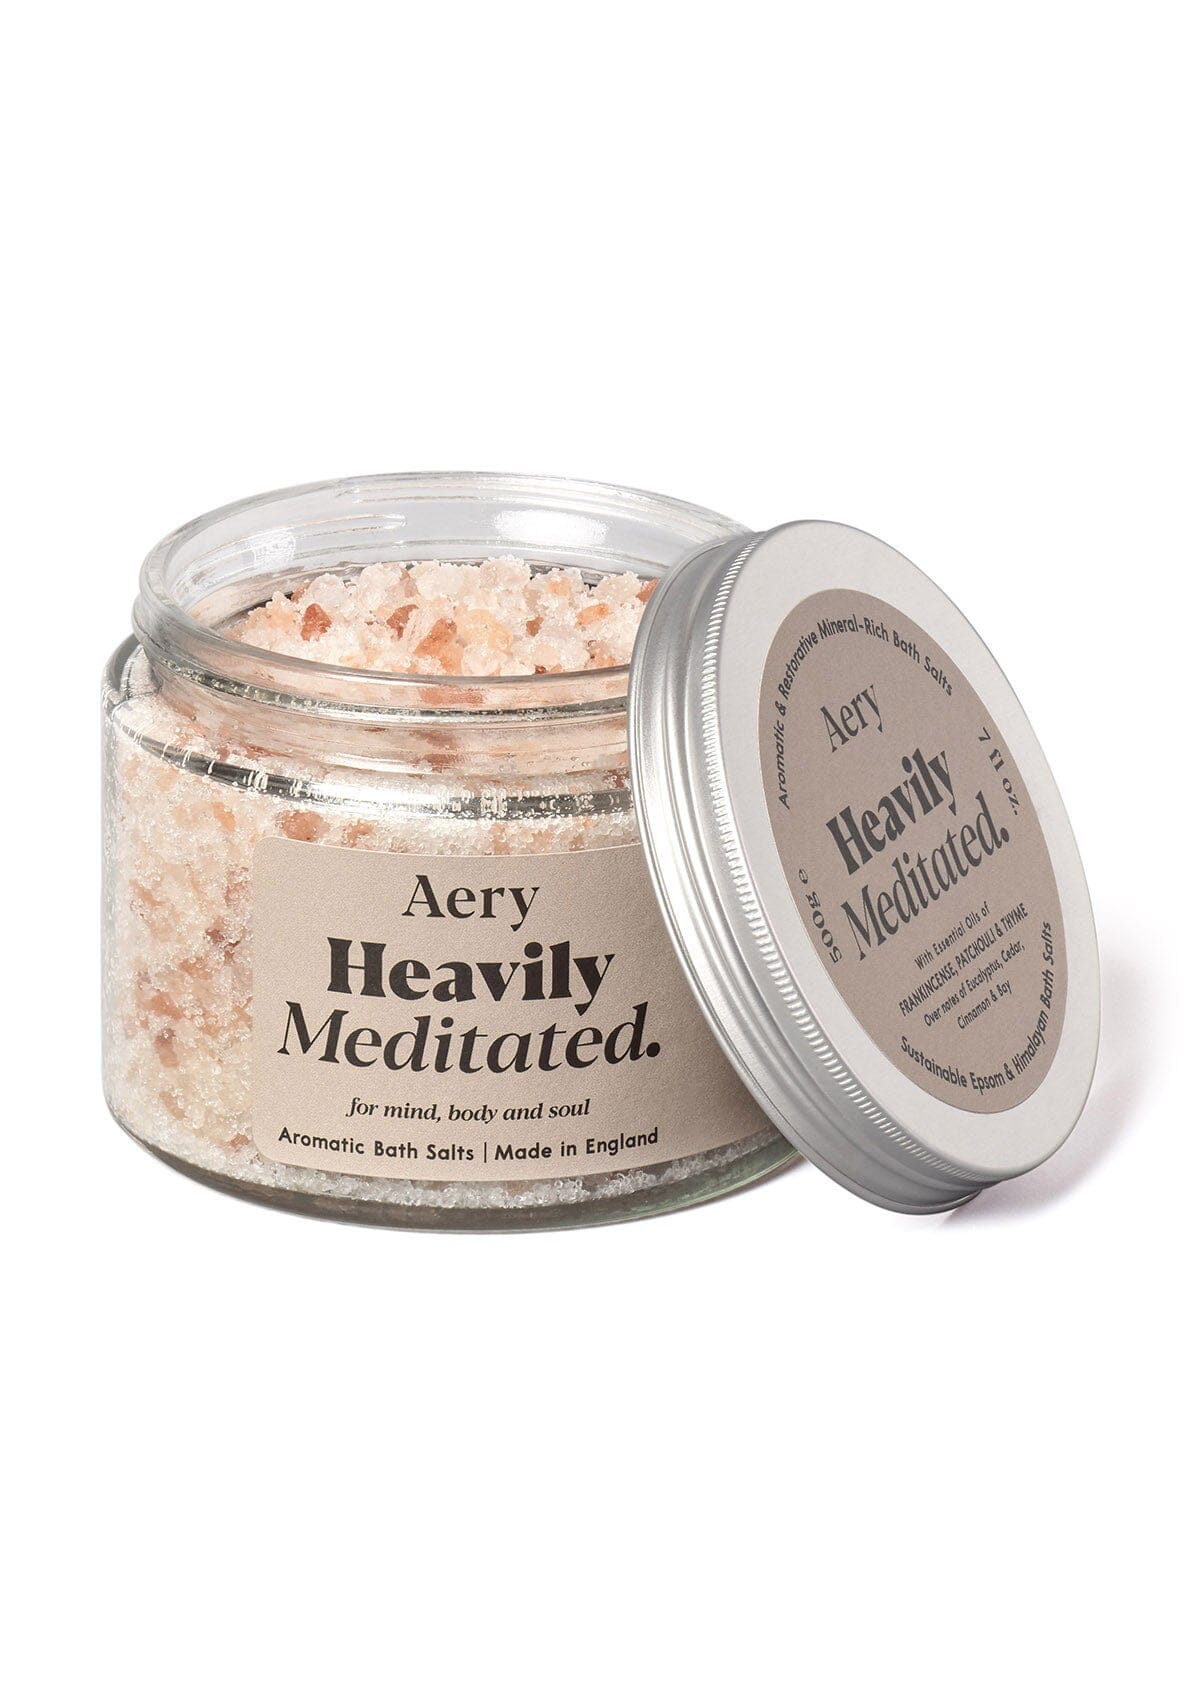 Heavily Meditated bath salts by Aery on white background 